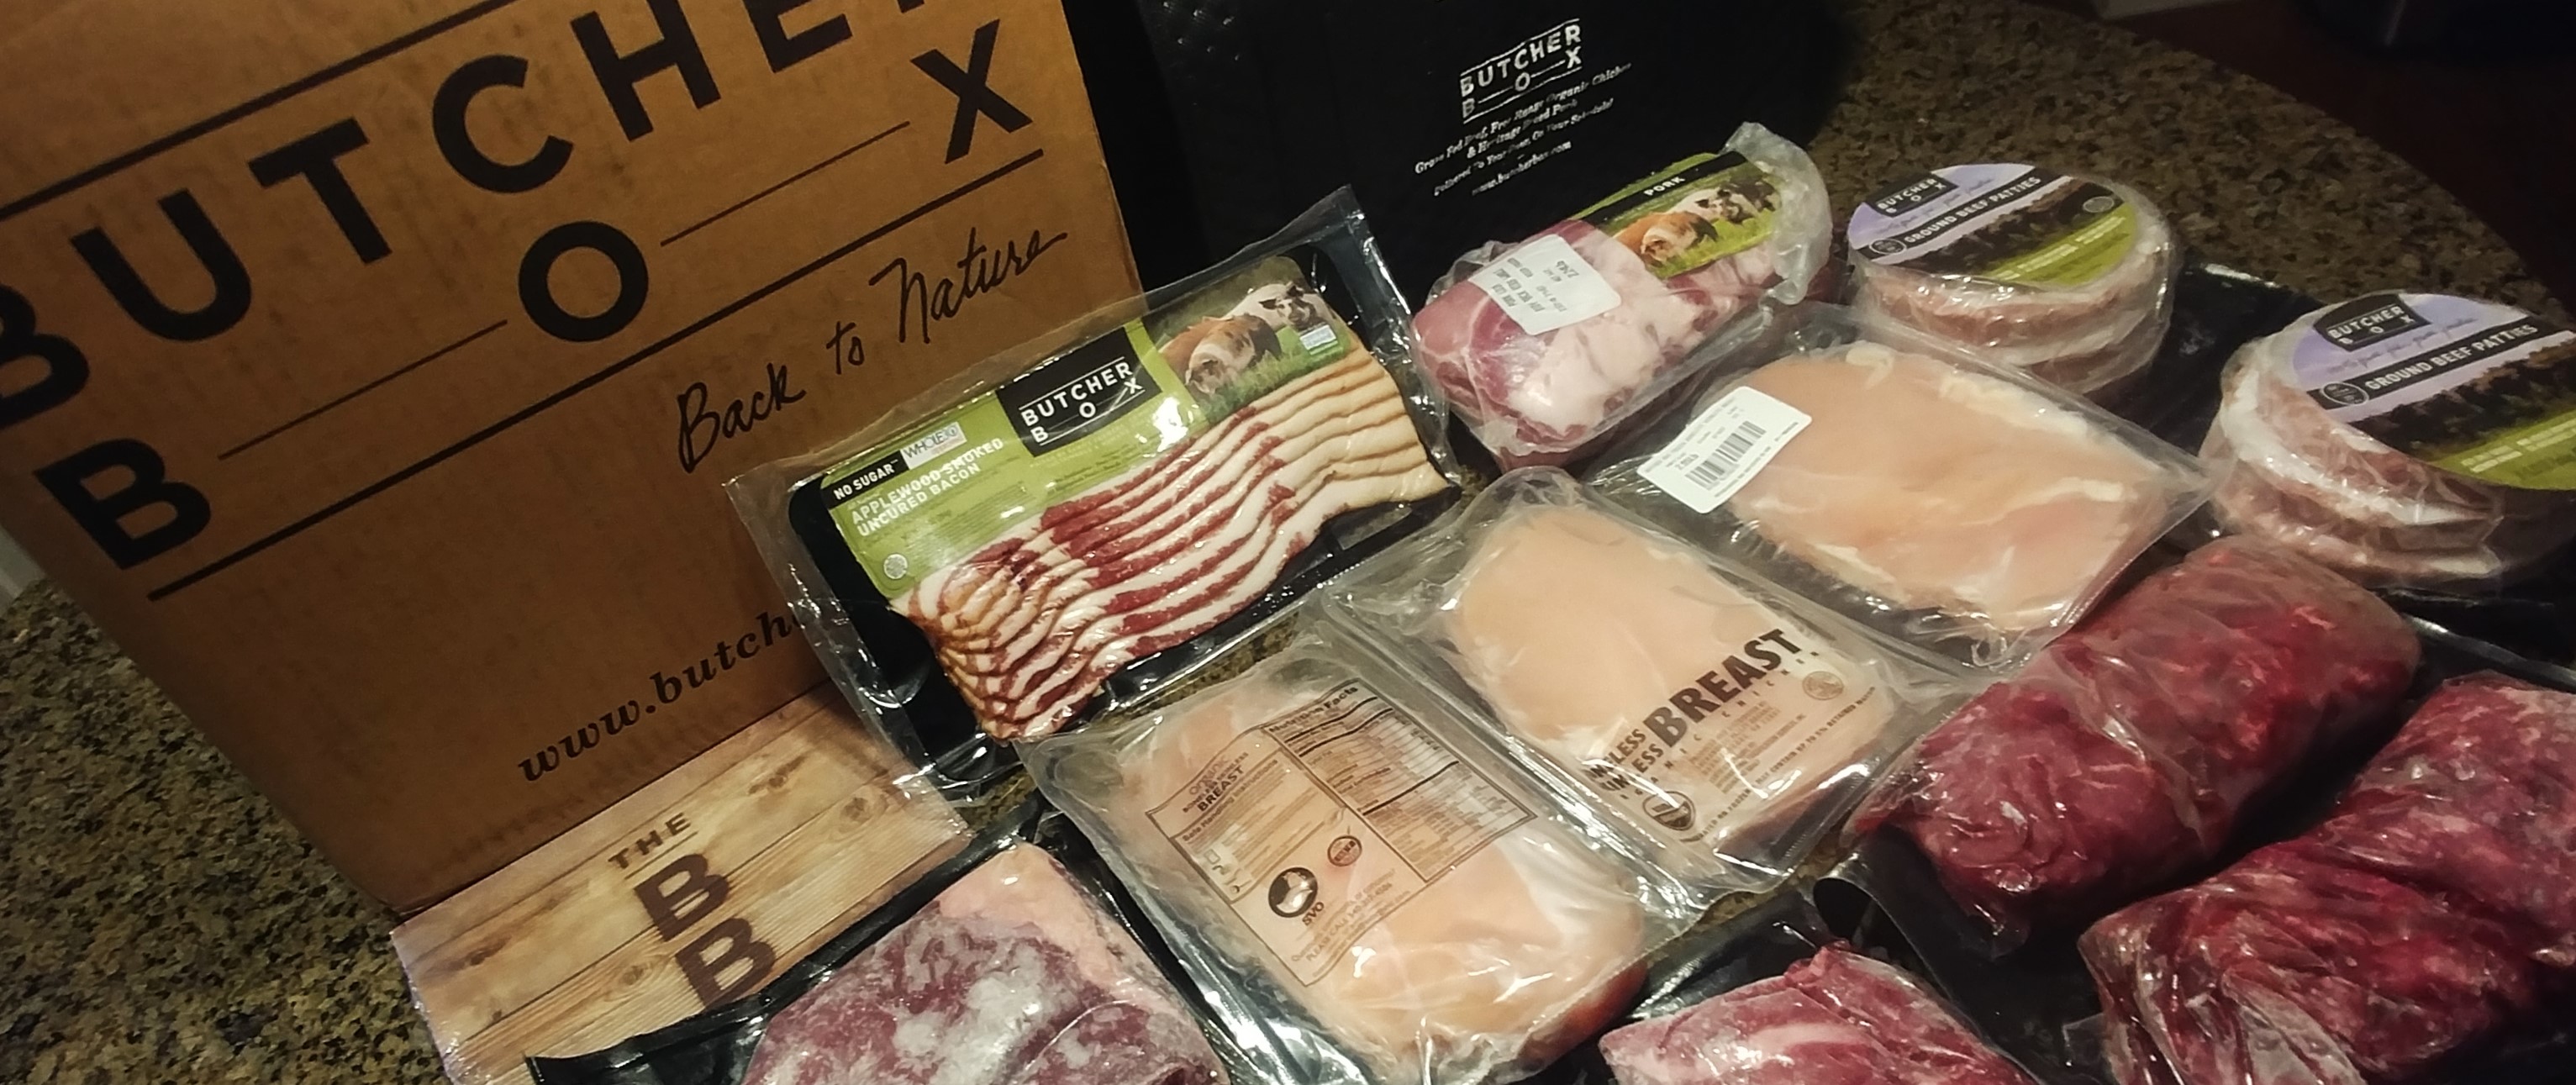 https://www.tryketowith.me/wp-content/uploads/2018/07/Keto-Butcher-Box-Review.jpg